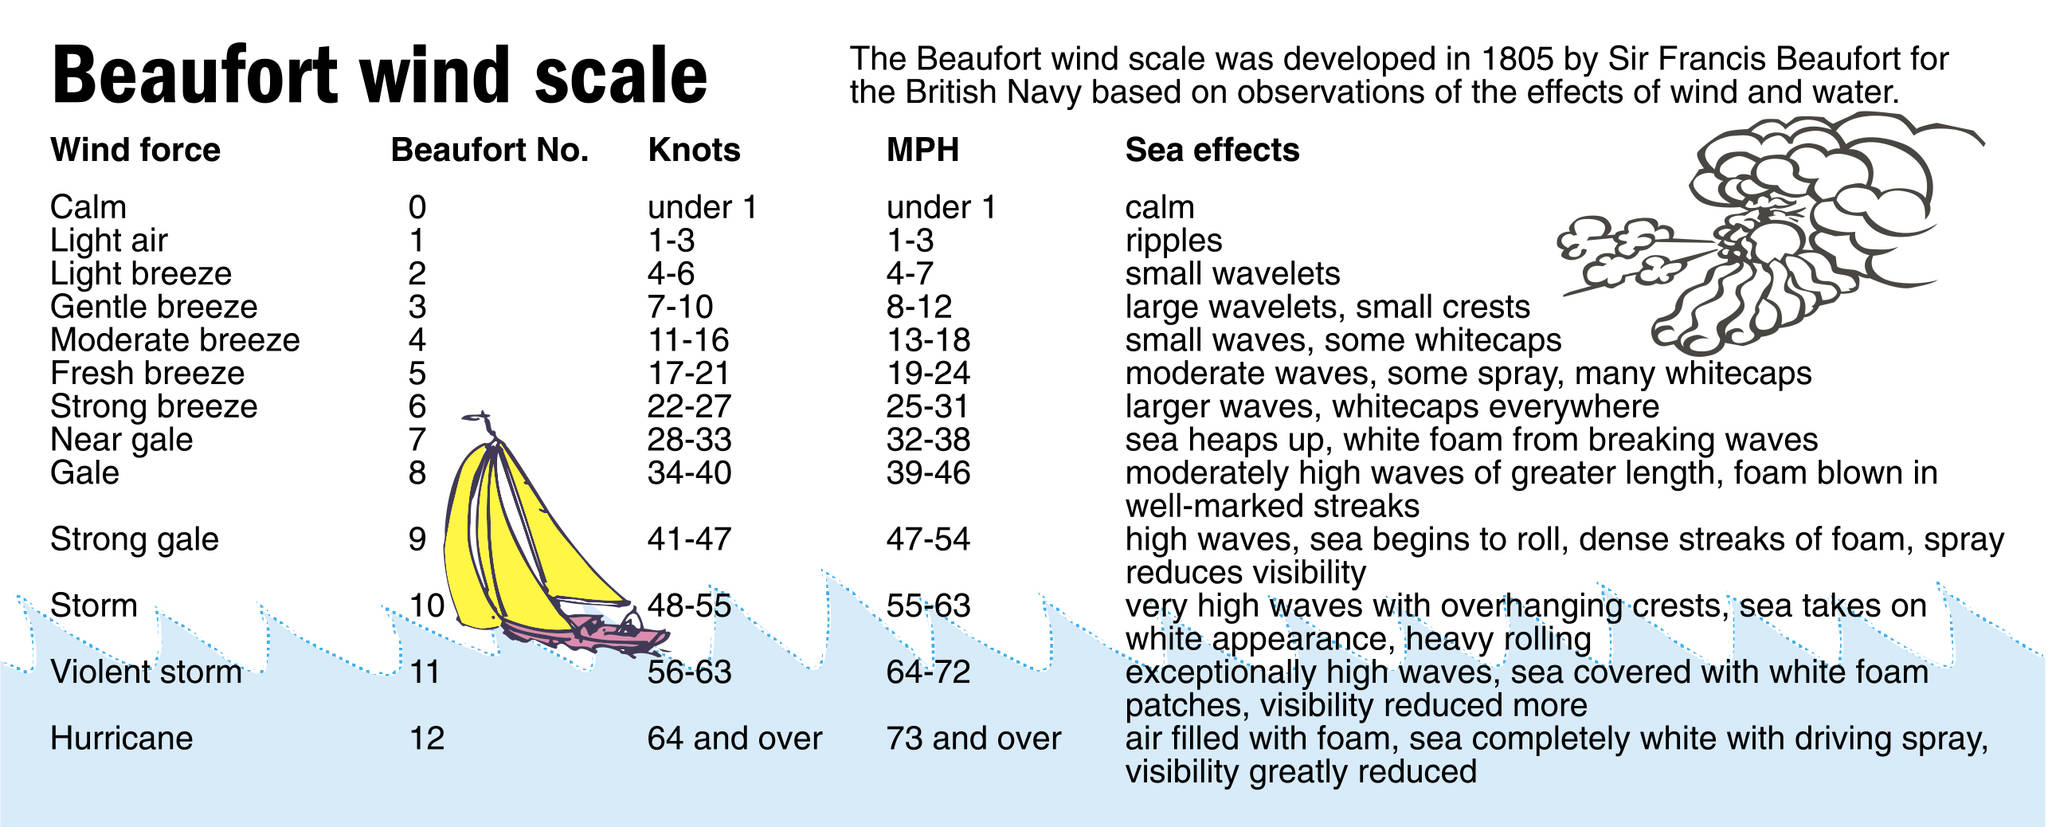 ON THE WATERFRONT: Instruments knot the only way to measure wind